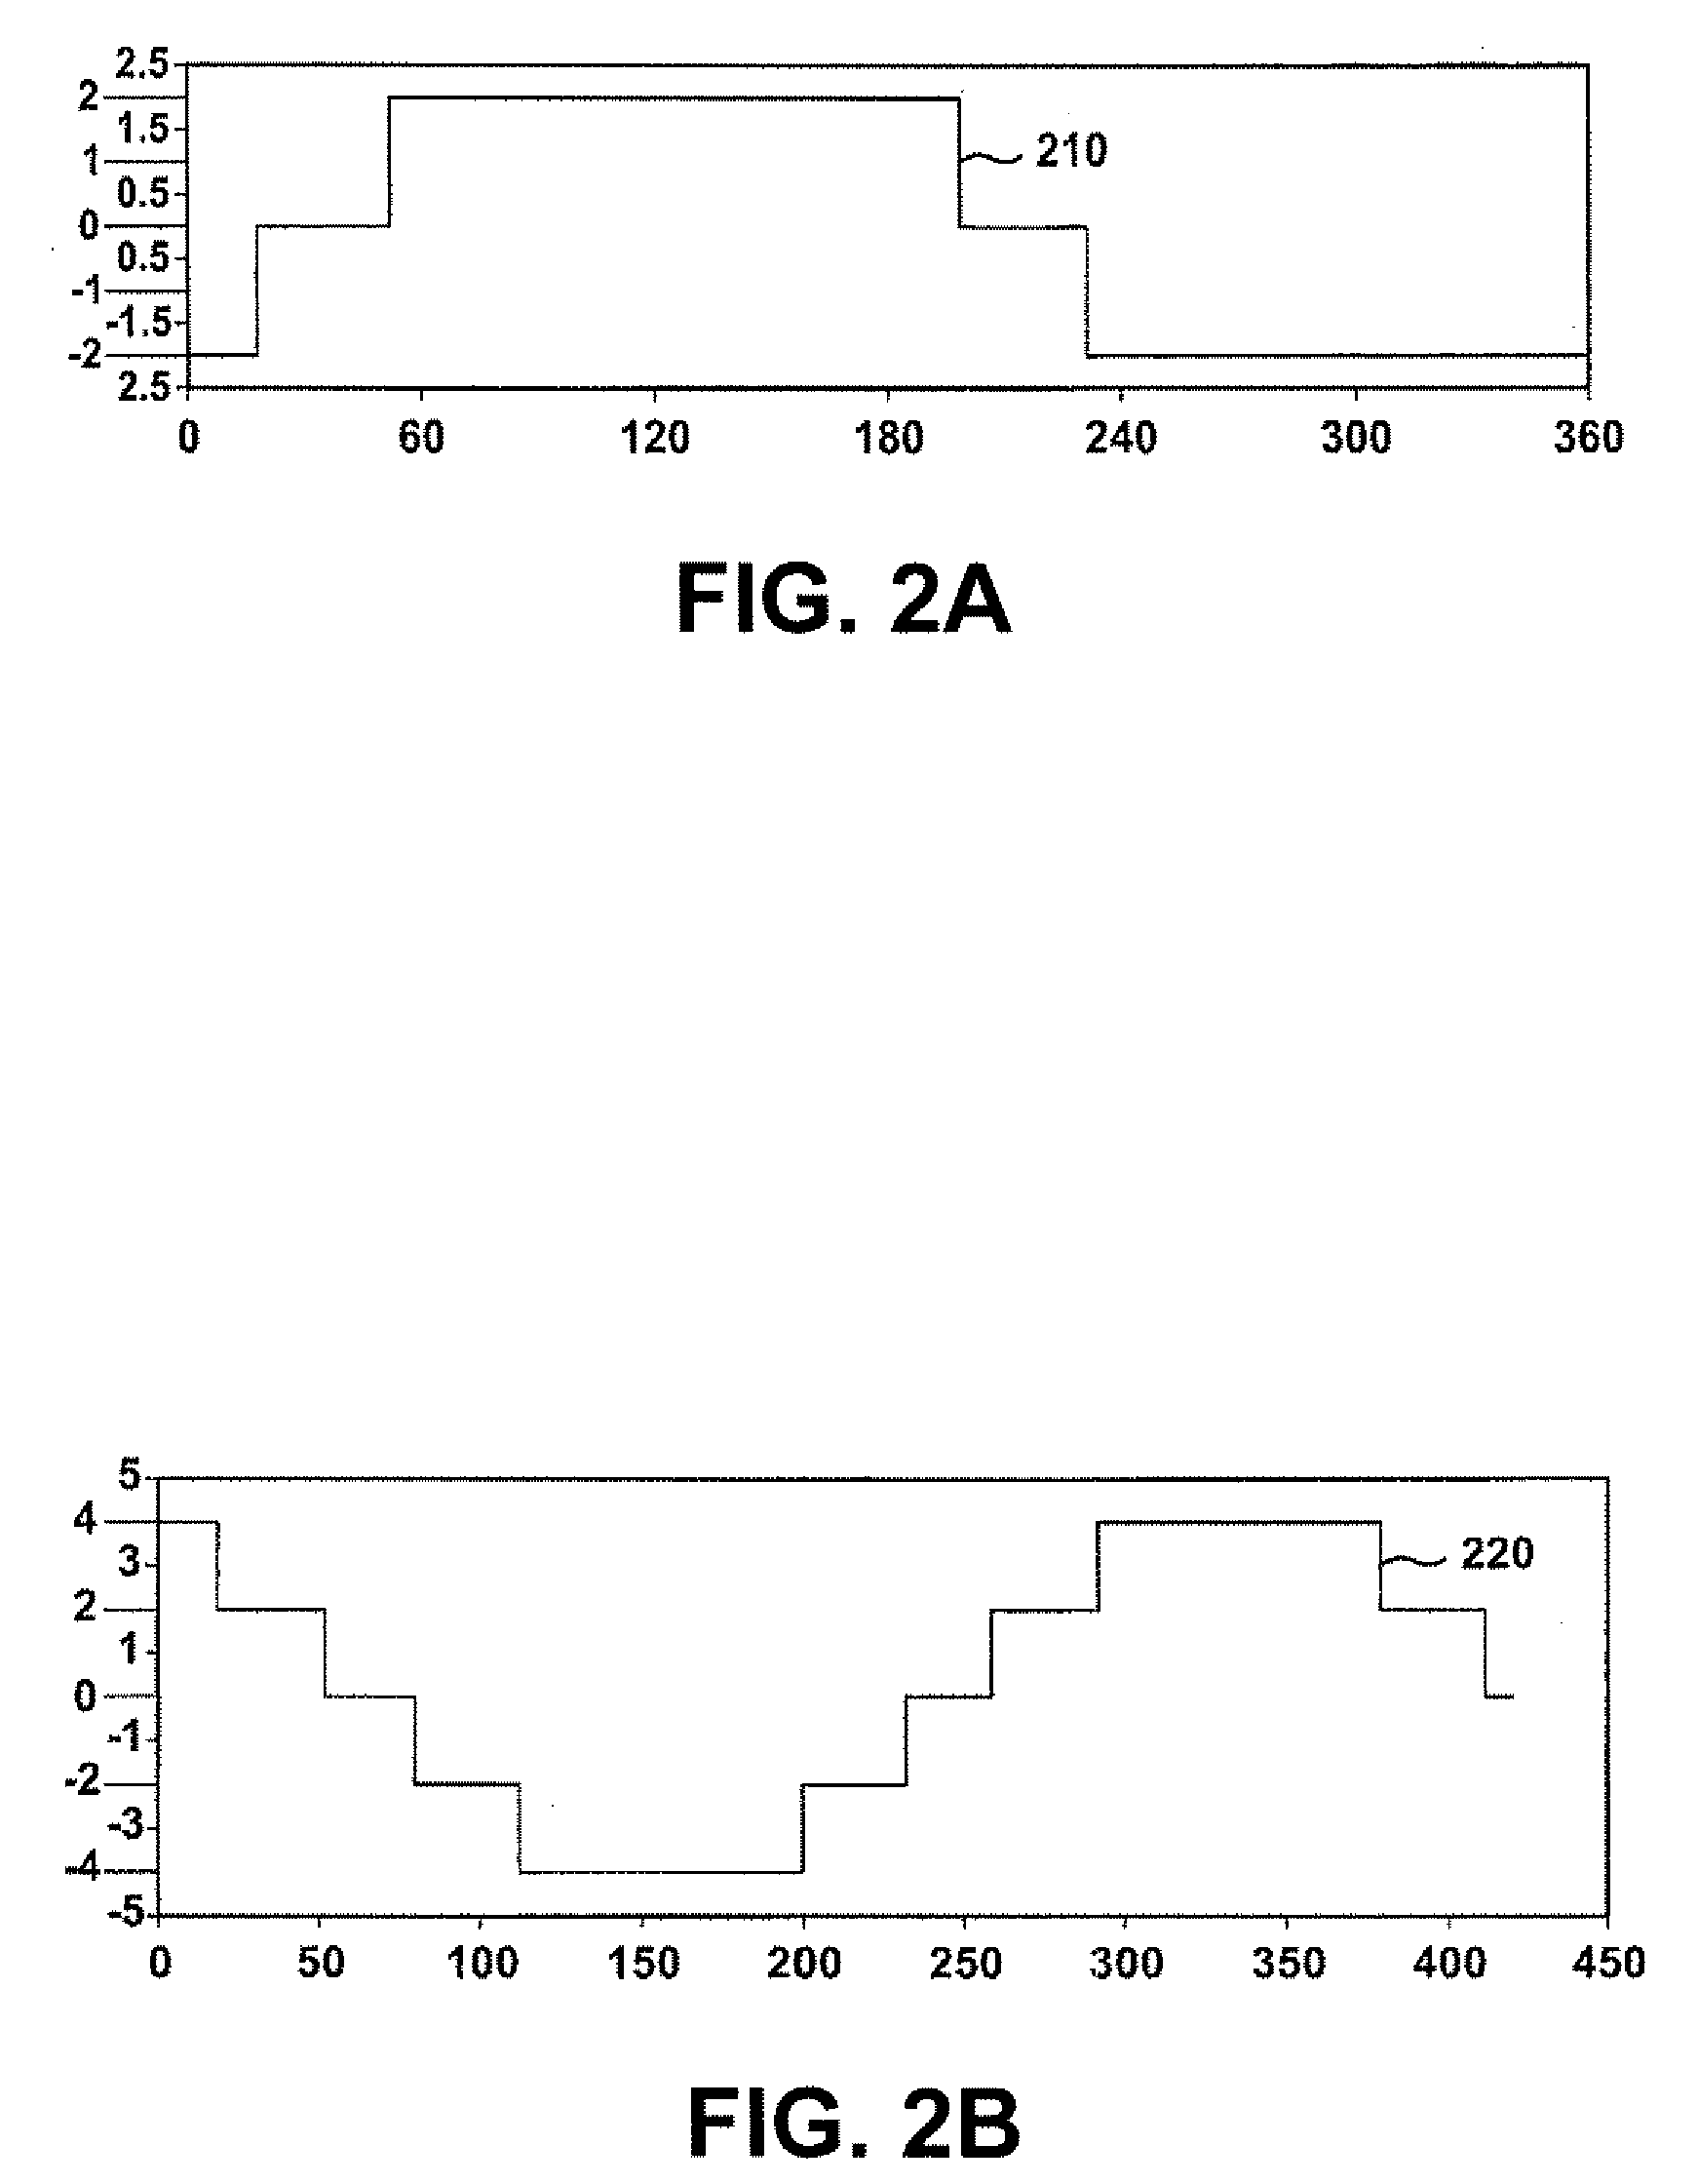 Systems and Methods for Controlling a Converter for Powering a Load